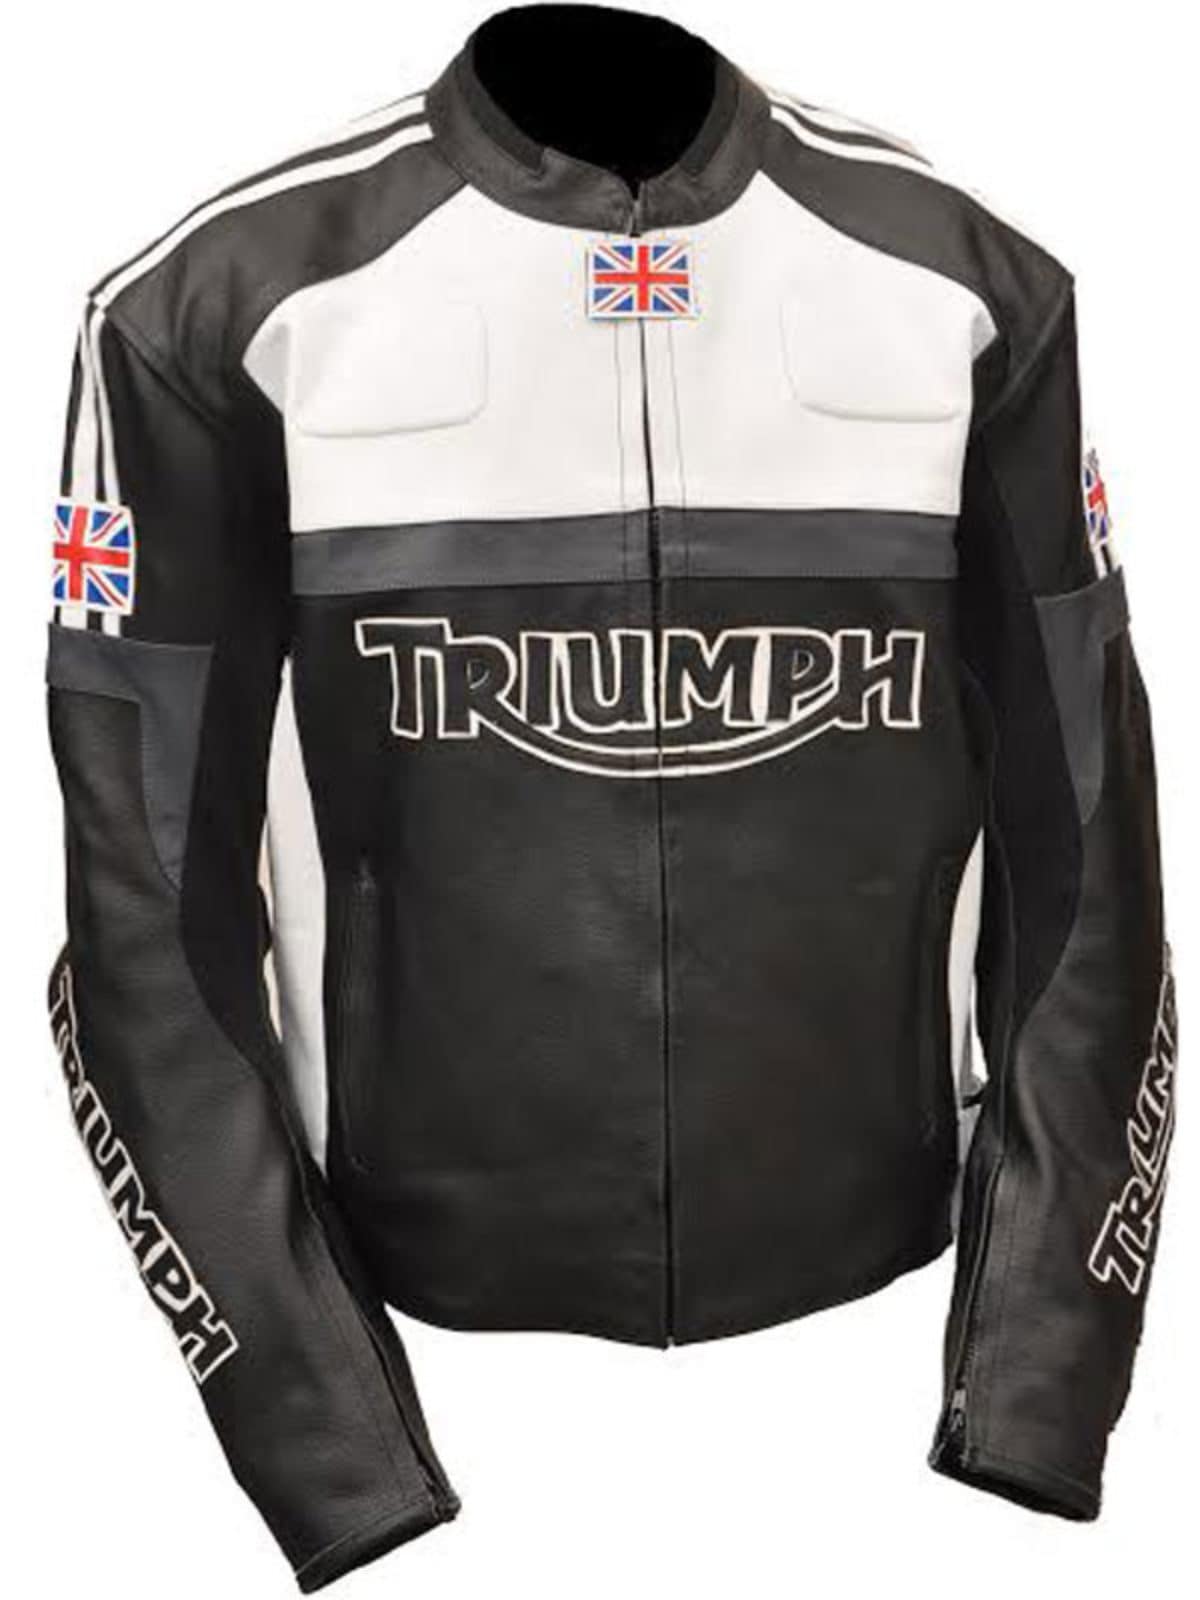 Racing Jacket Triumph Leather | Jackets Motorcycle Junction